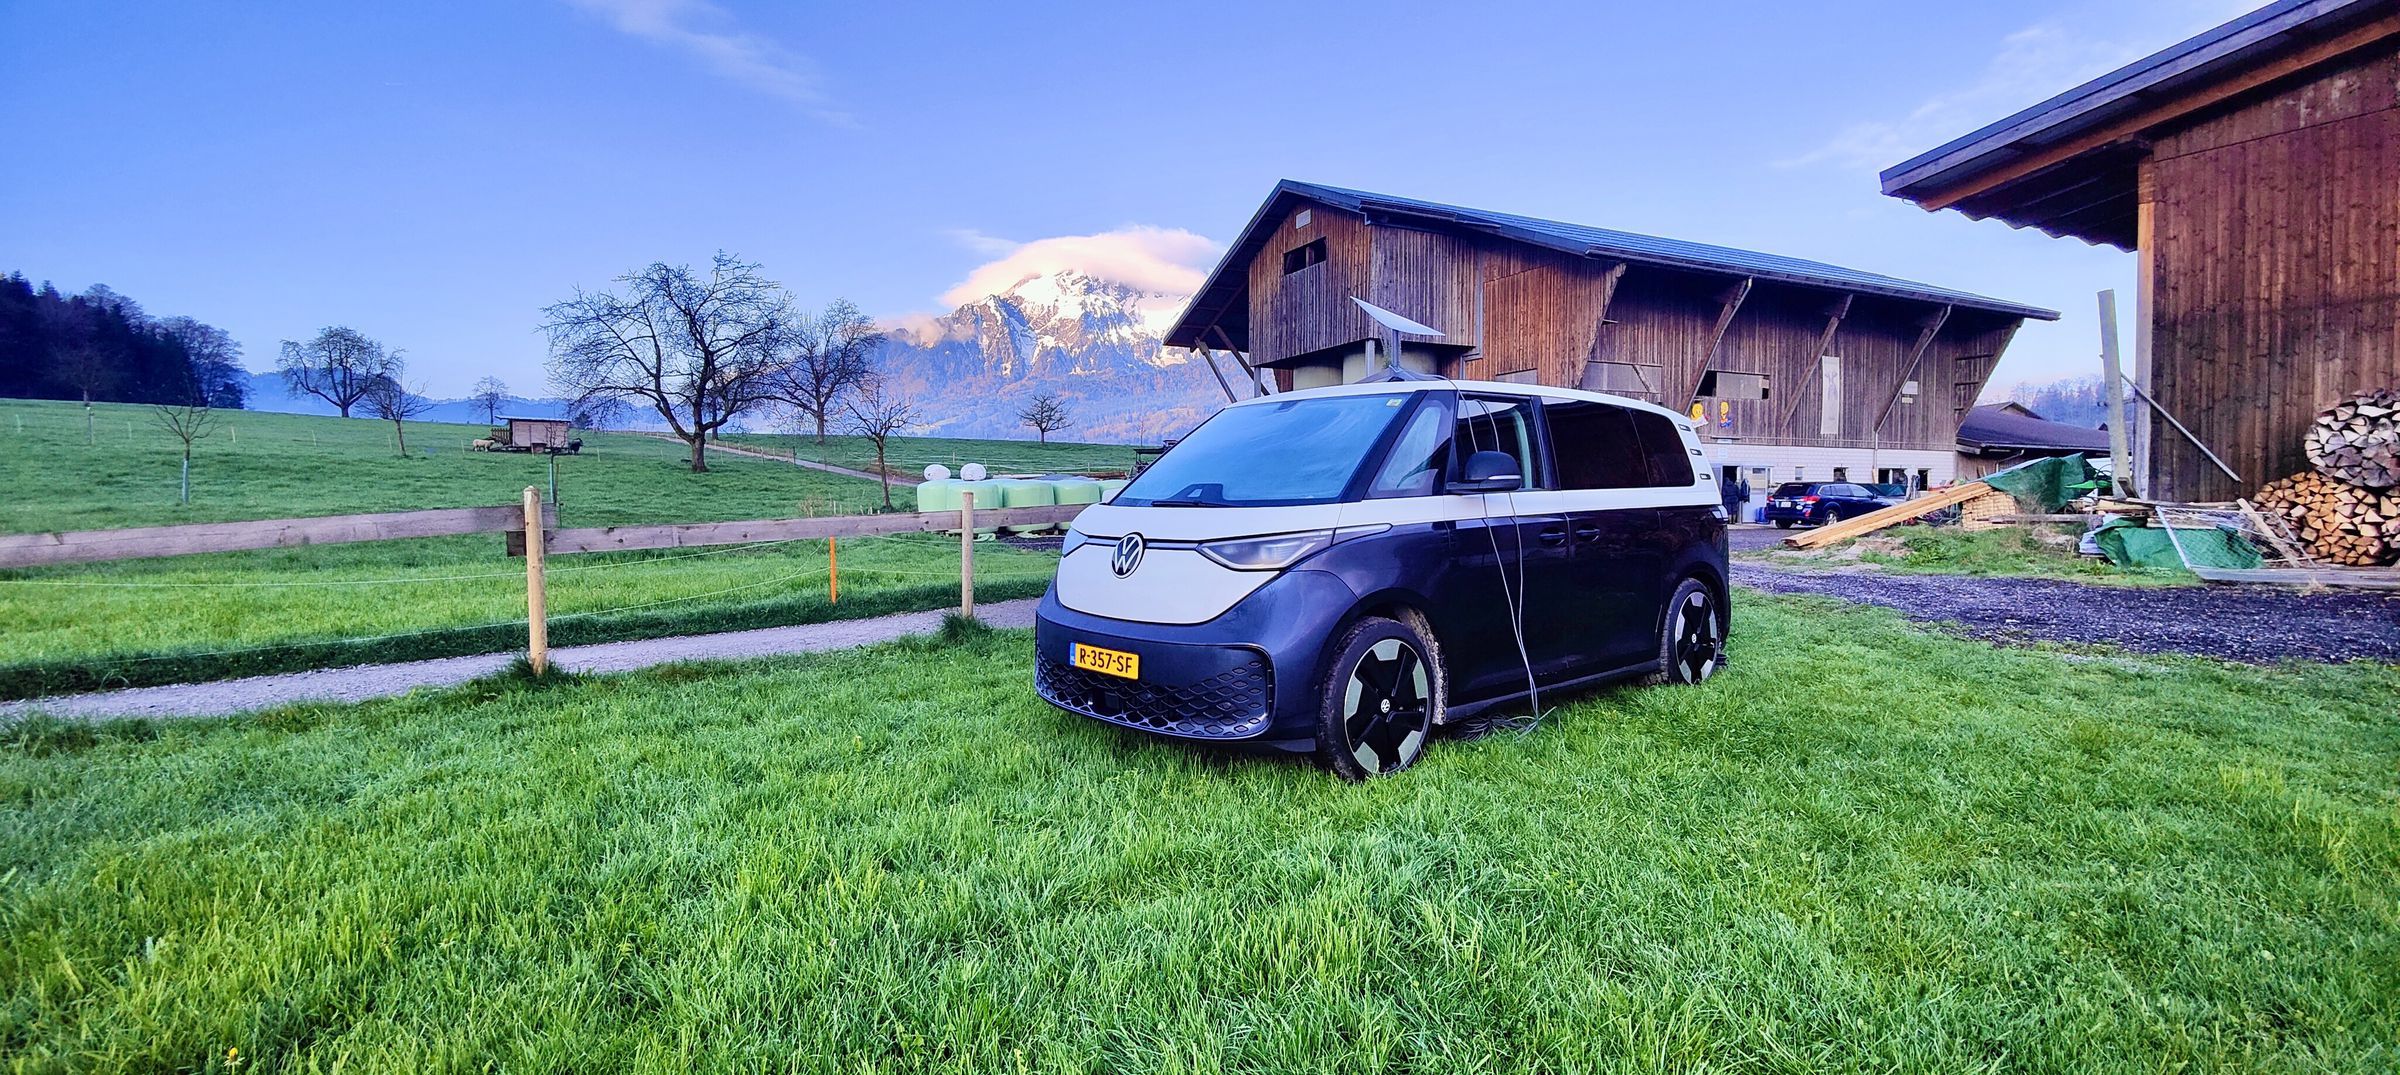 Starlink RV kept us connected with fast downloads, even on this remote Swiss farm.